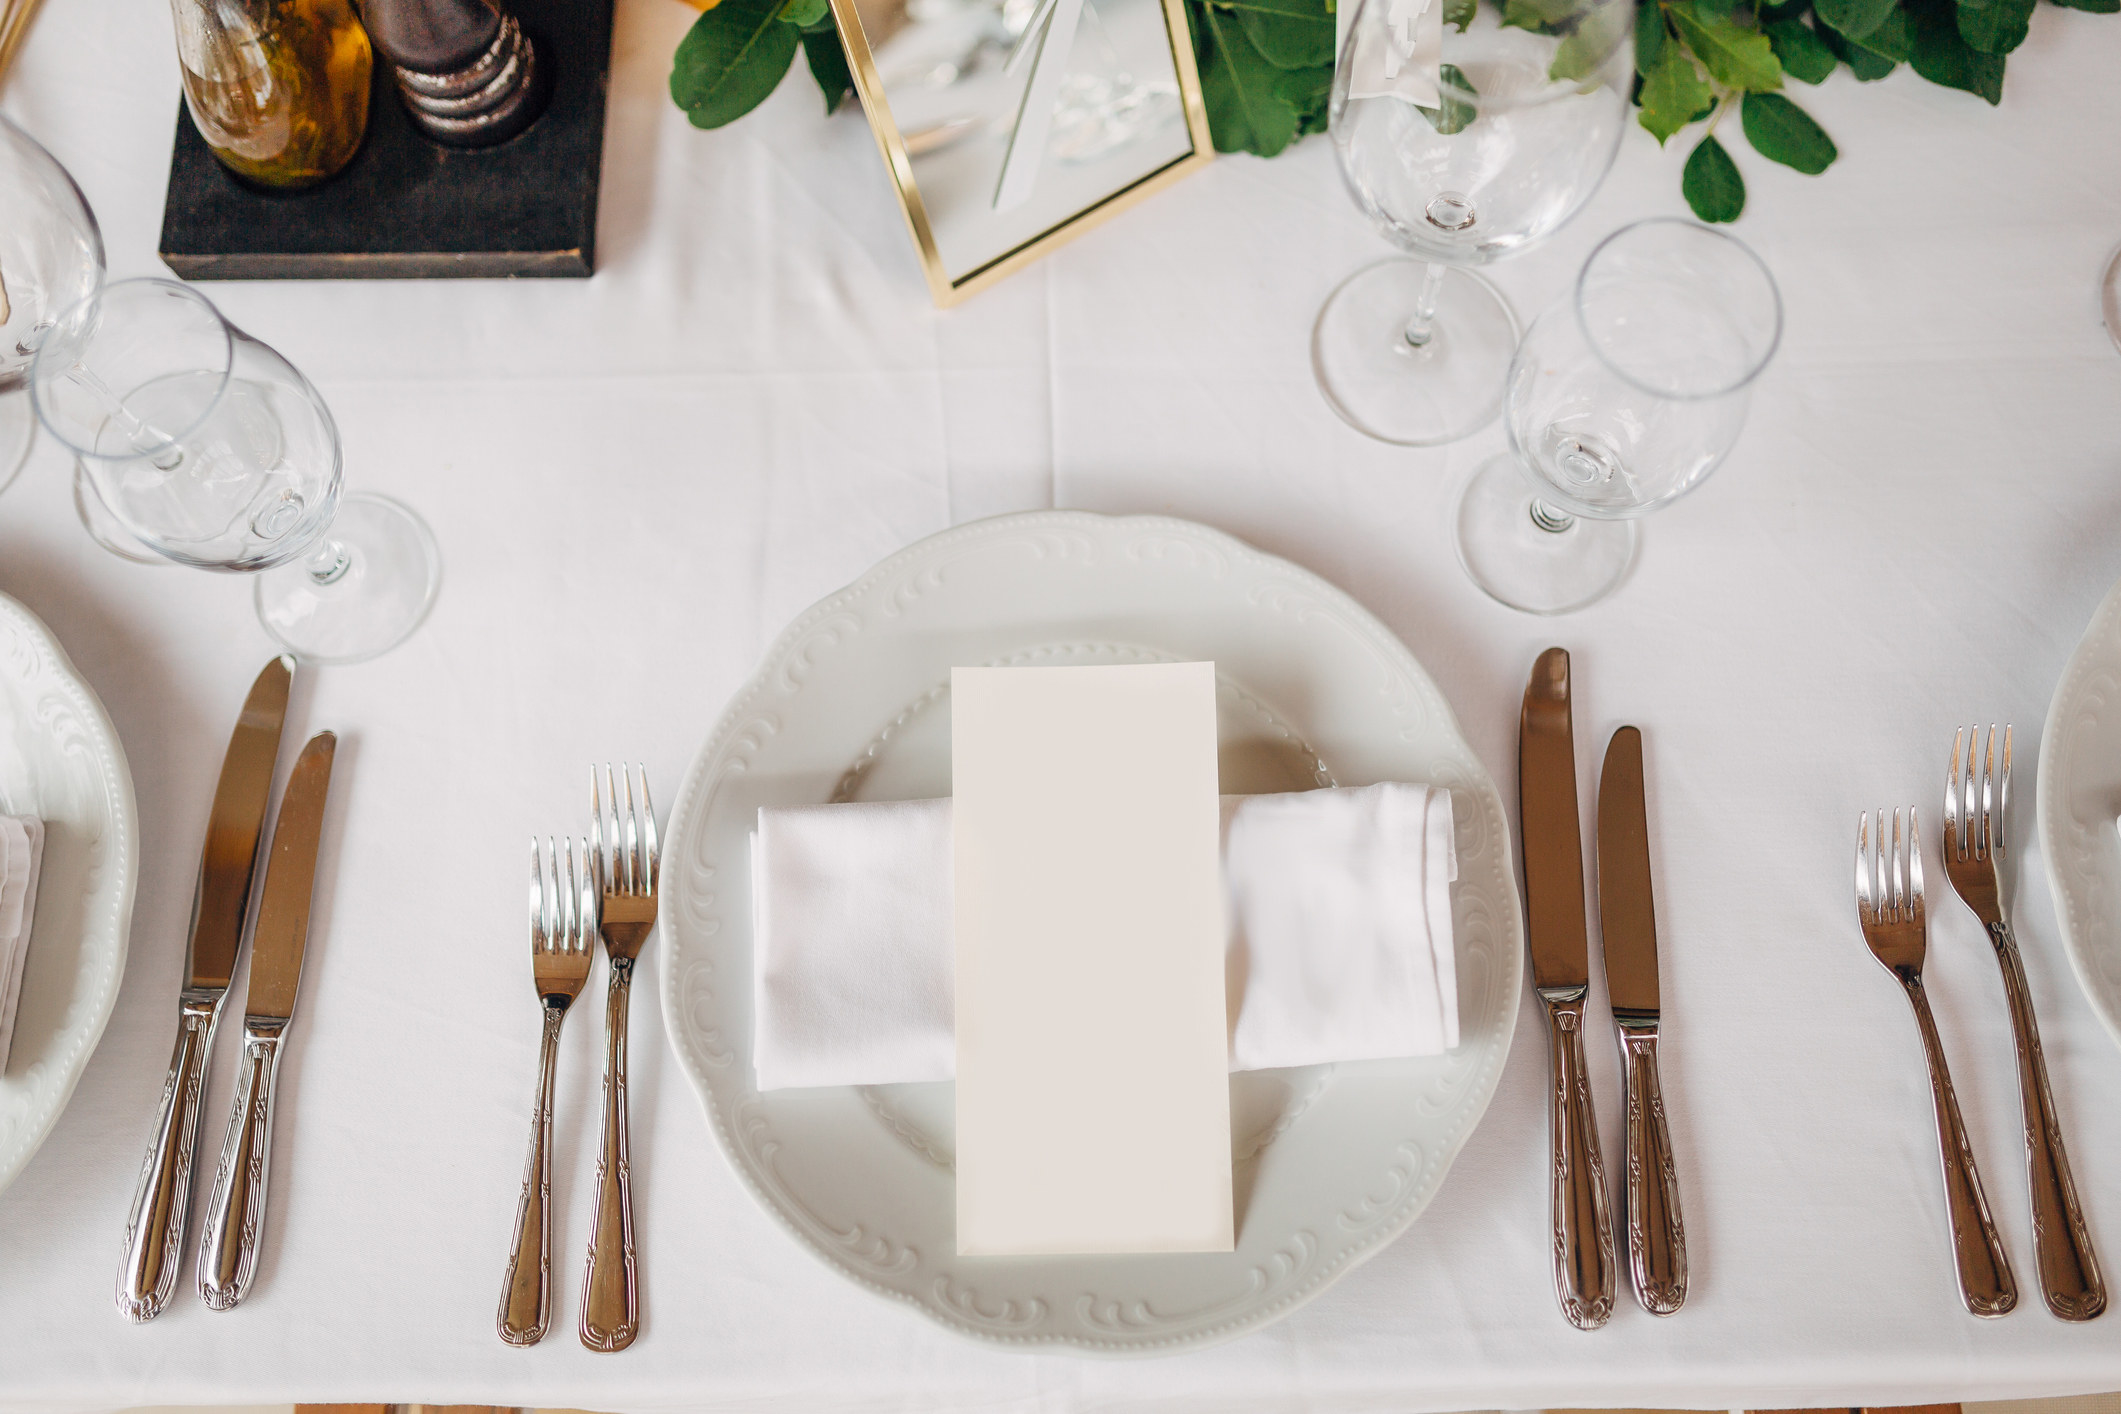 place setting on the table